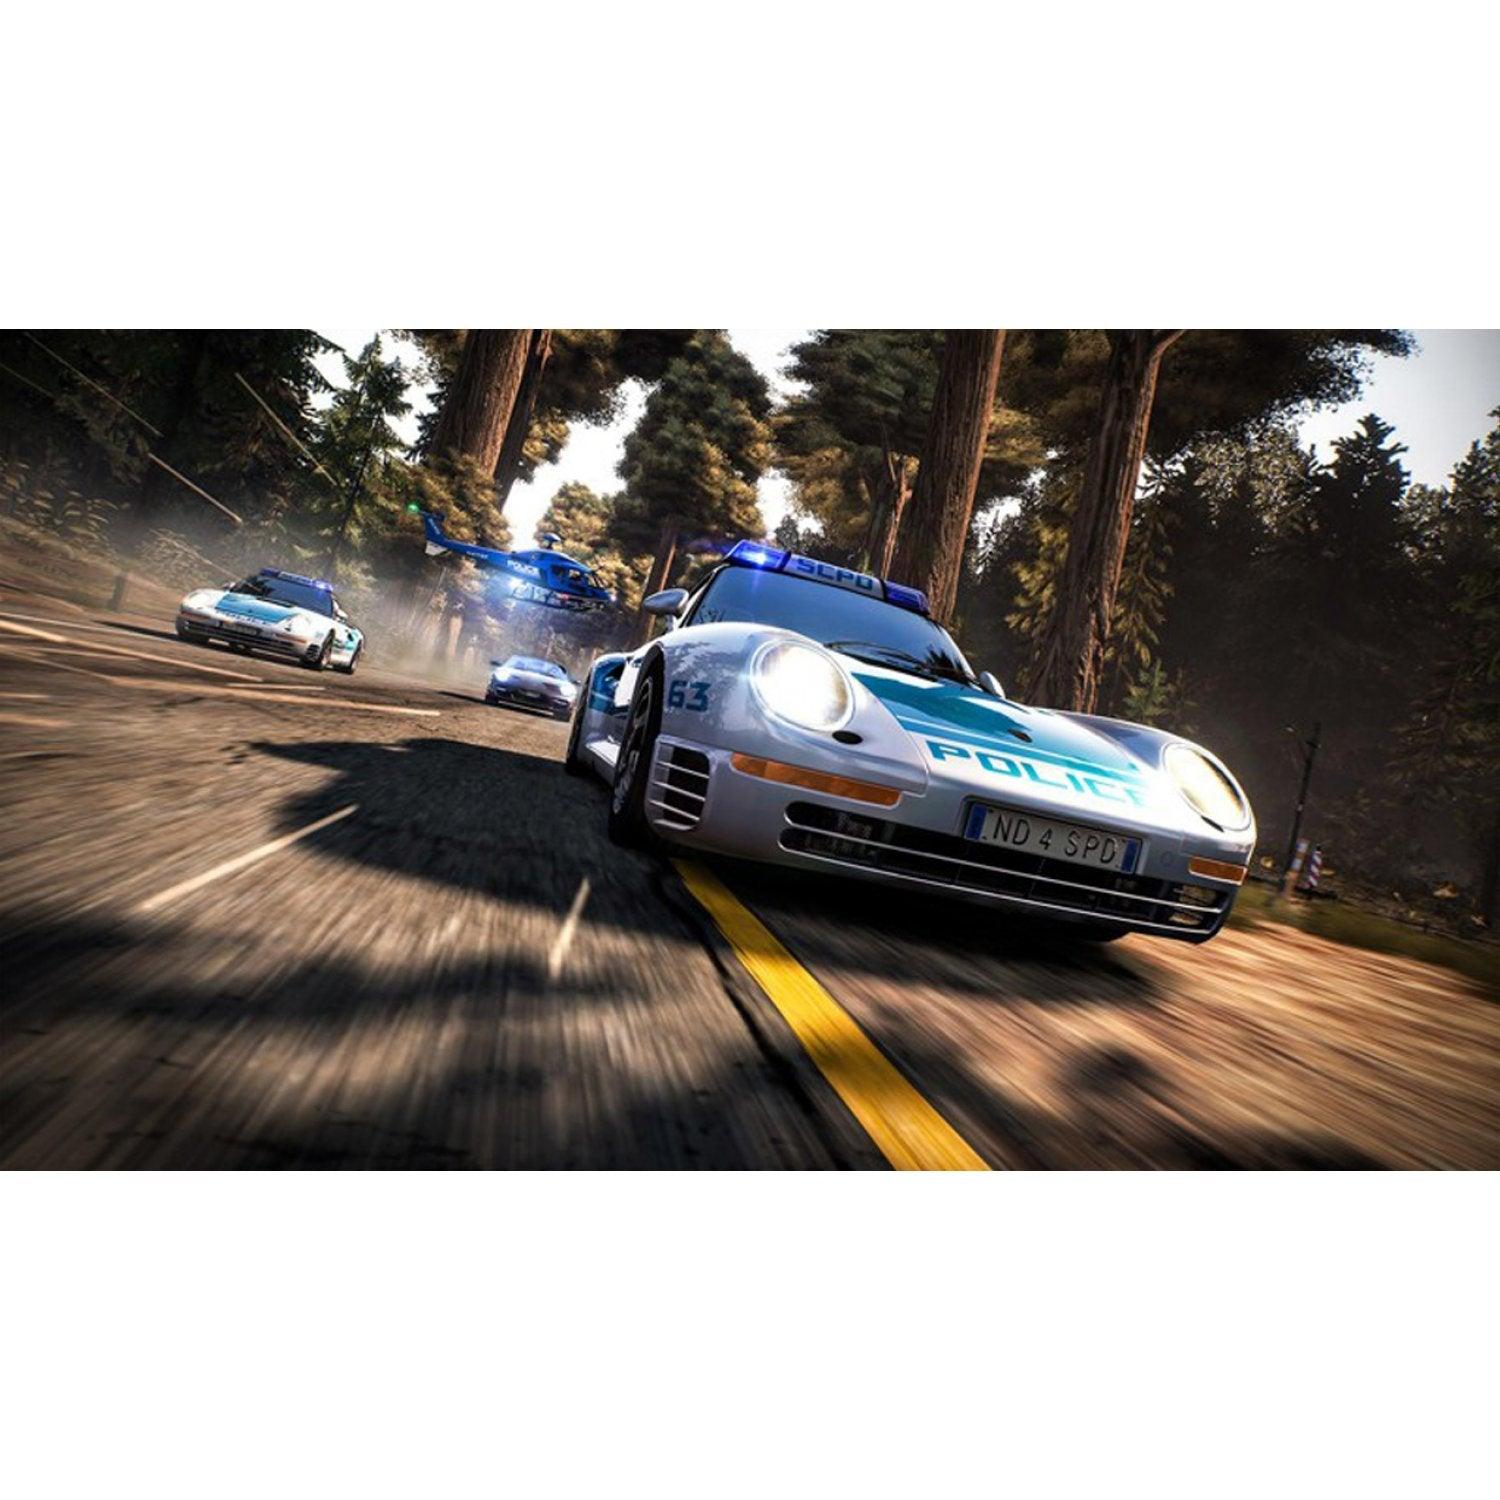 need for speed hot pursuit remastered pc controller